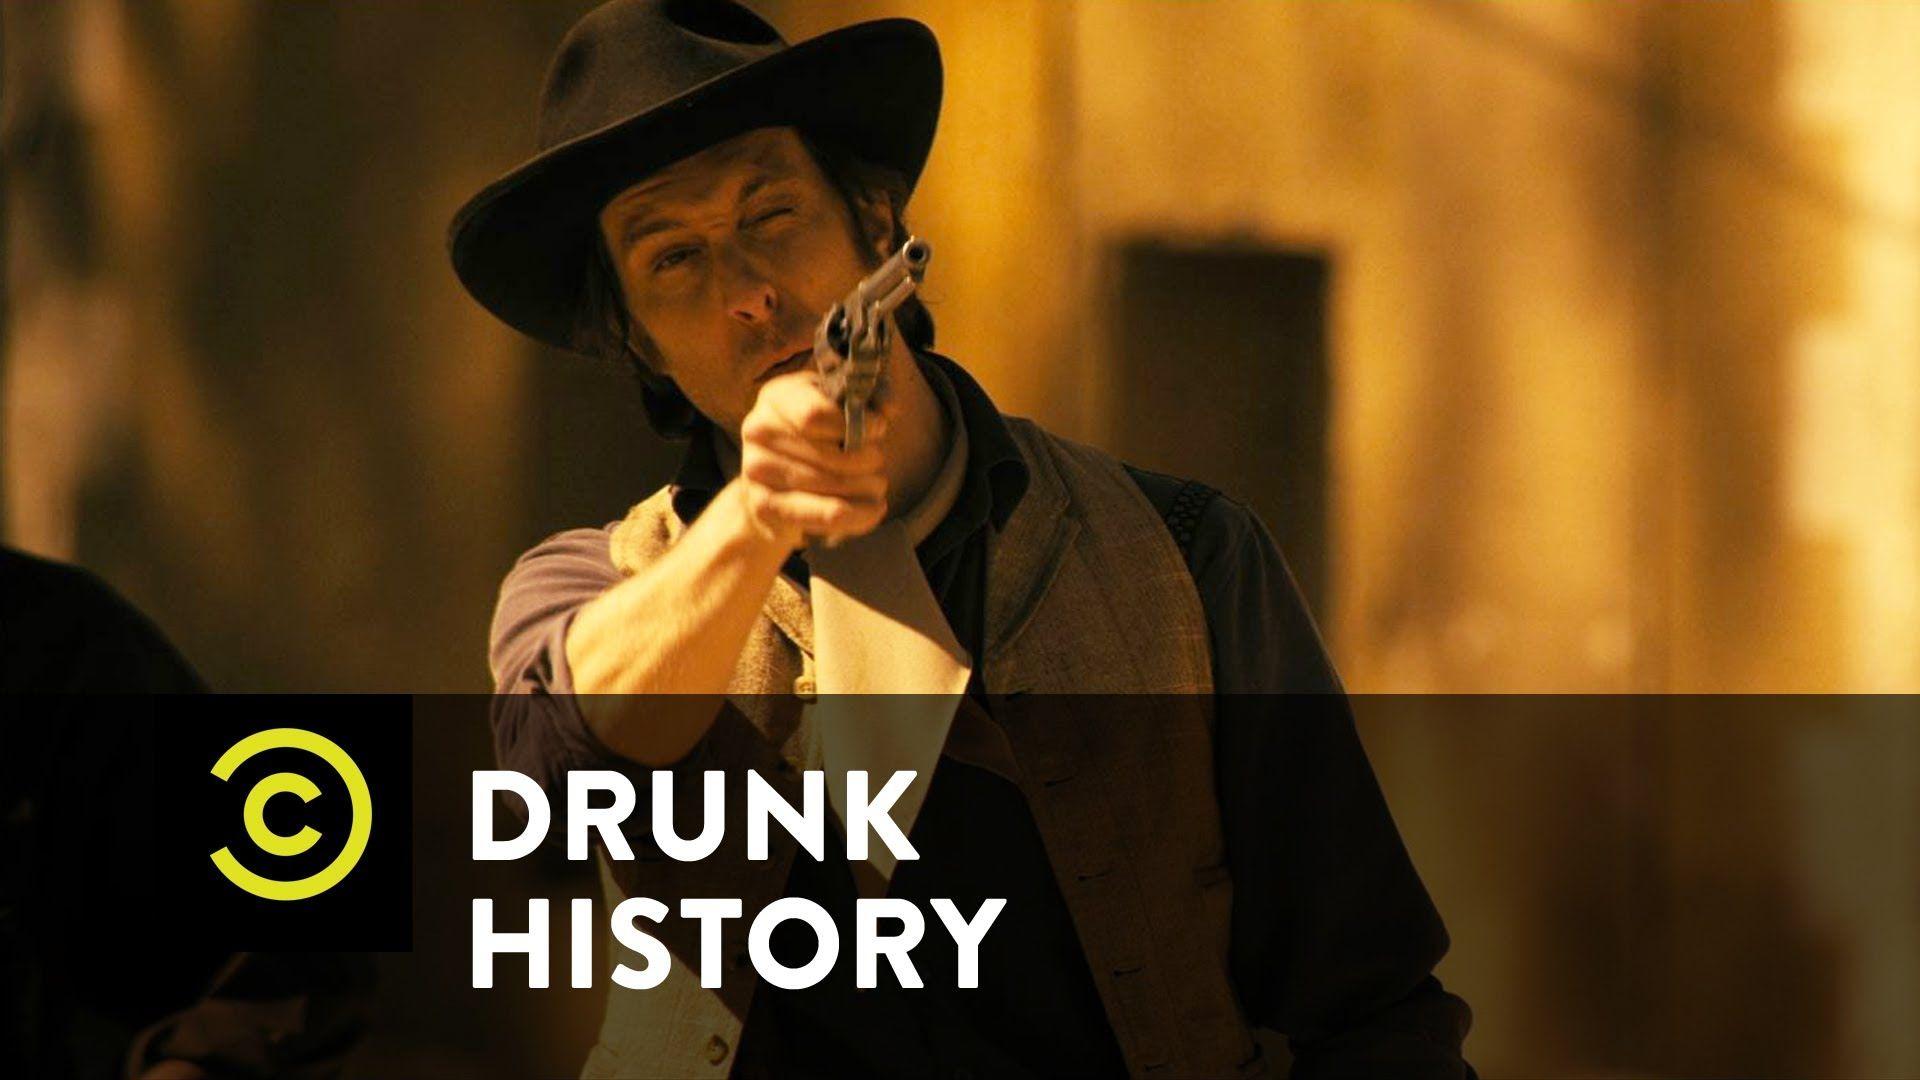 Drunk stories. Drunk History Christmas. Billy story.